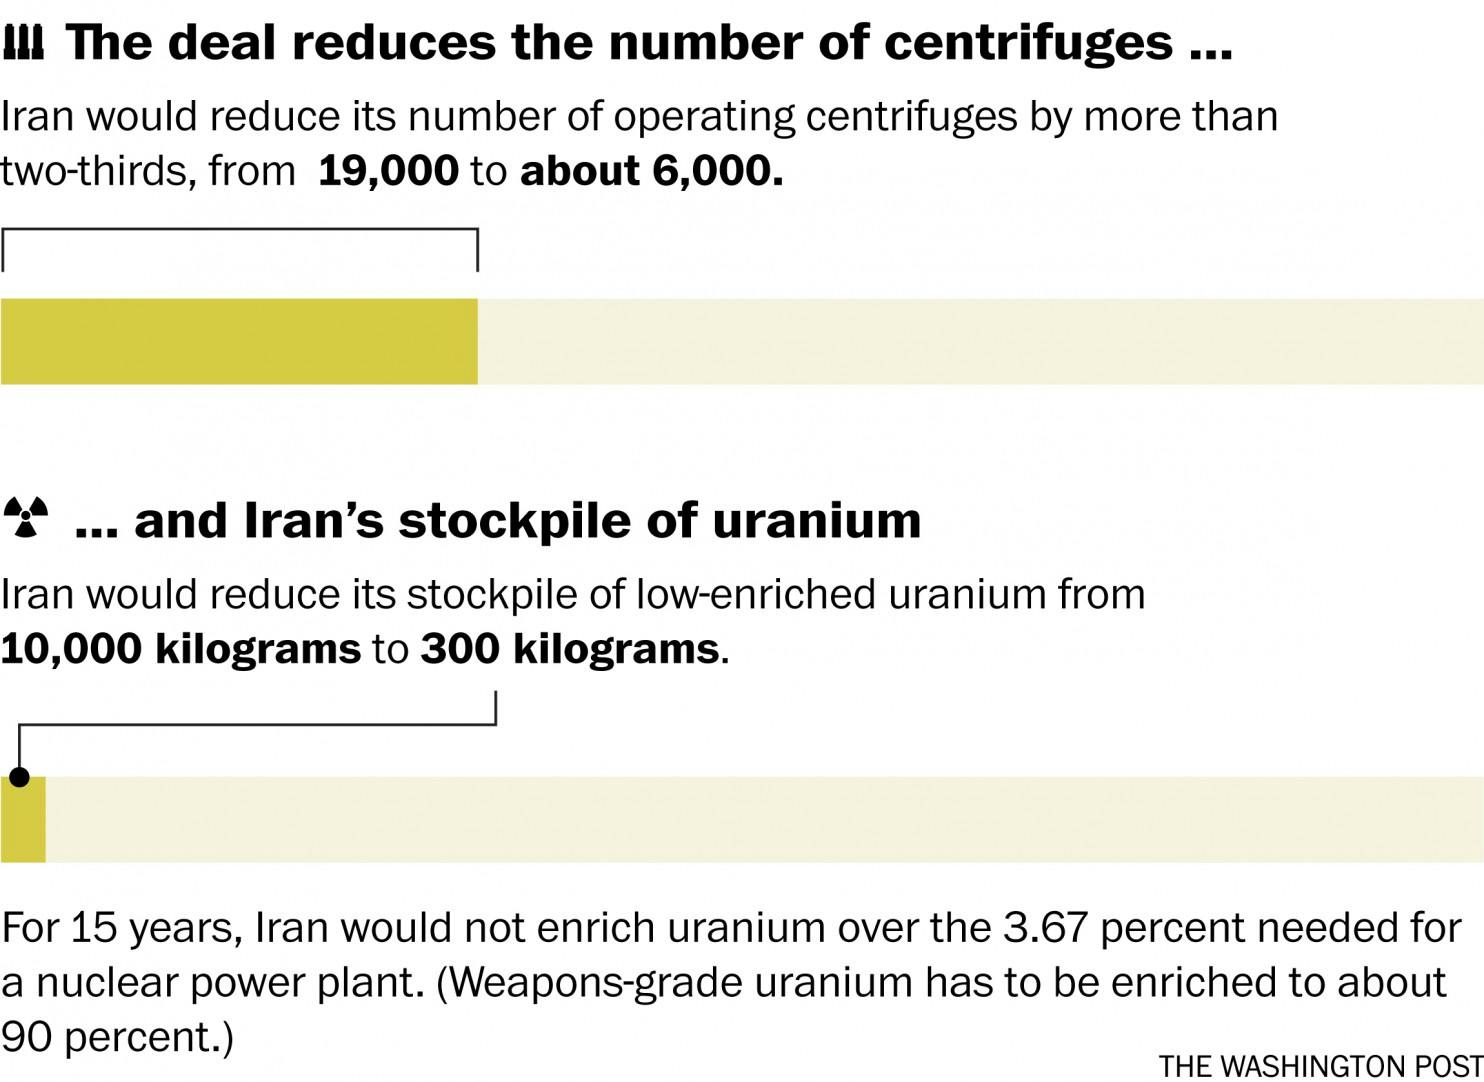 This picture shows the limitation of Iran's nuclear capabilities after the agreement.